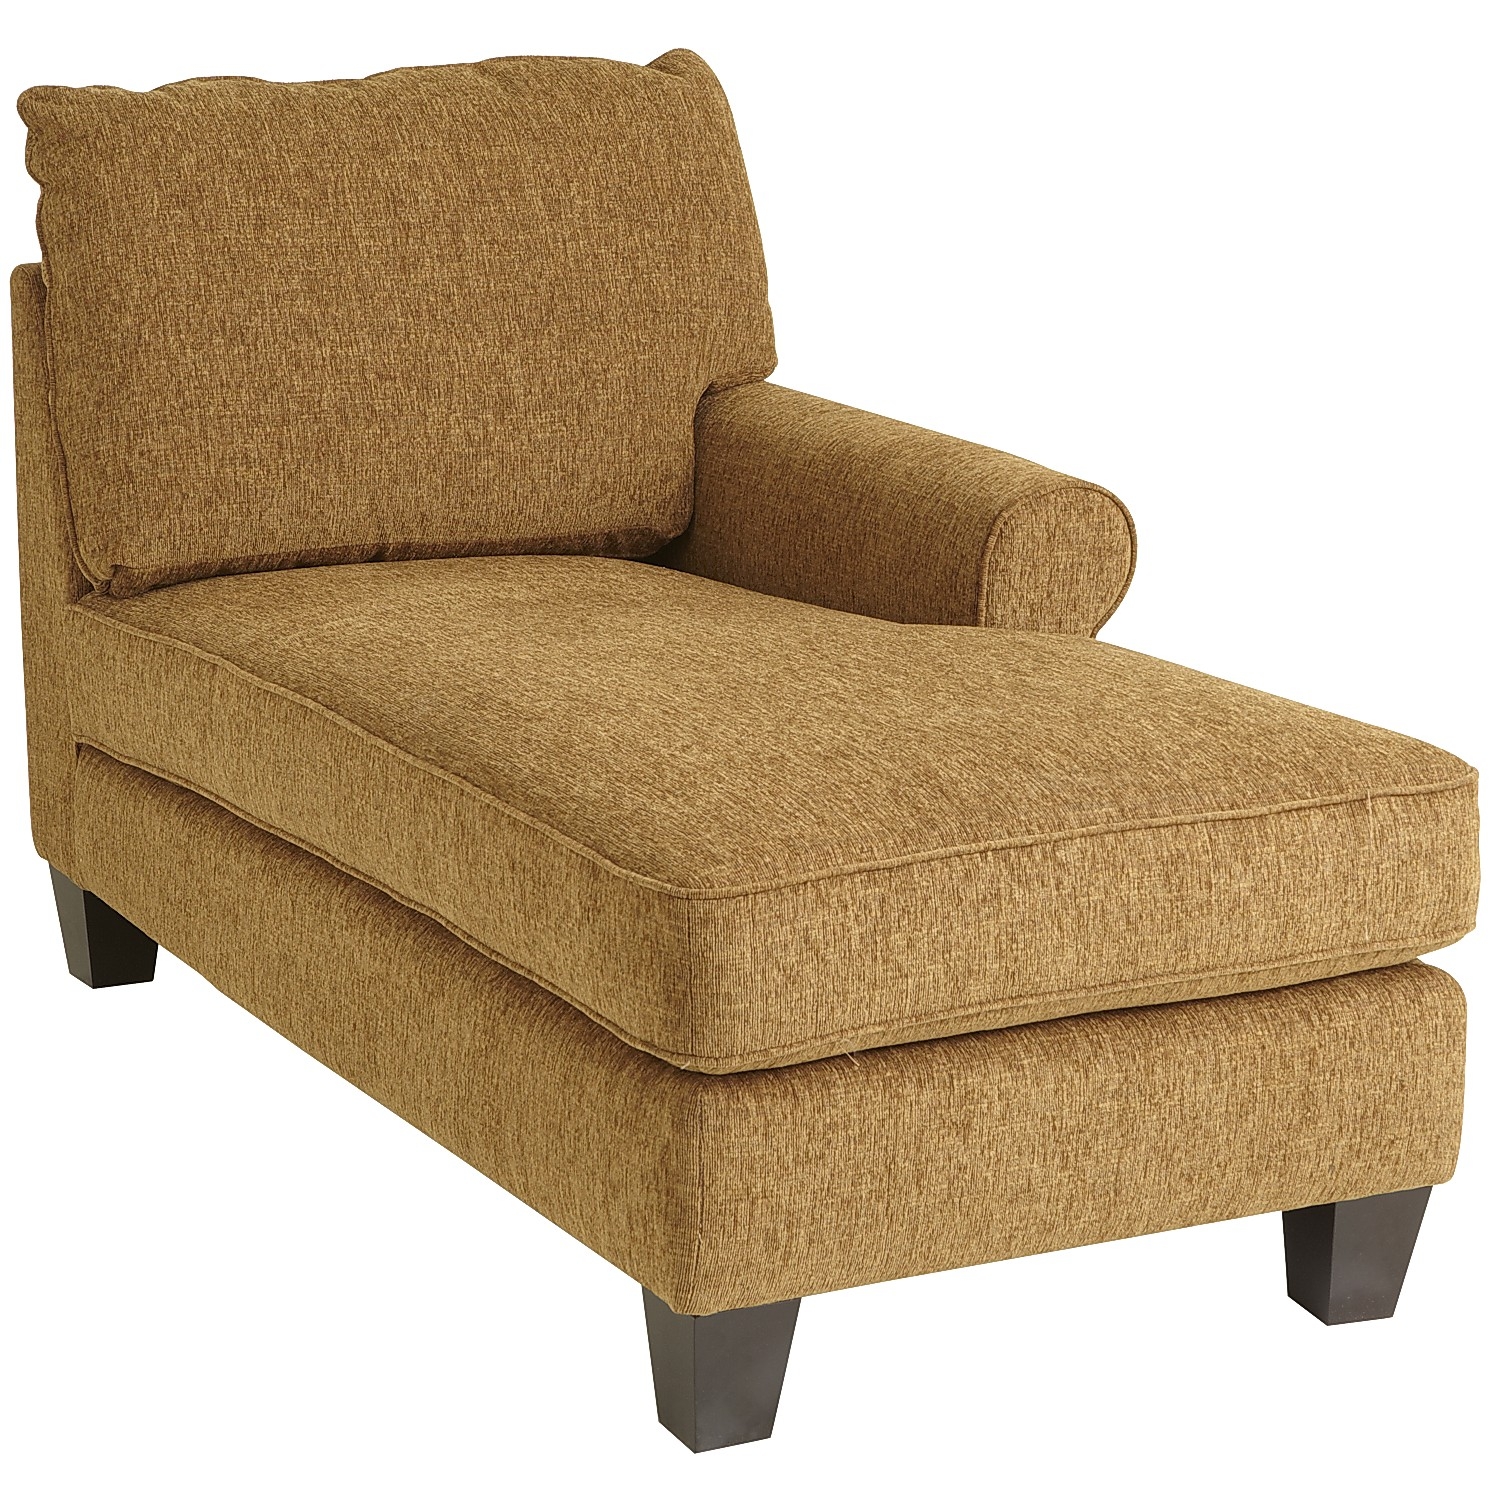 Right arm chaise lounge 10